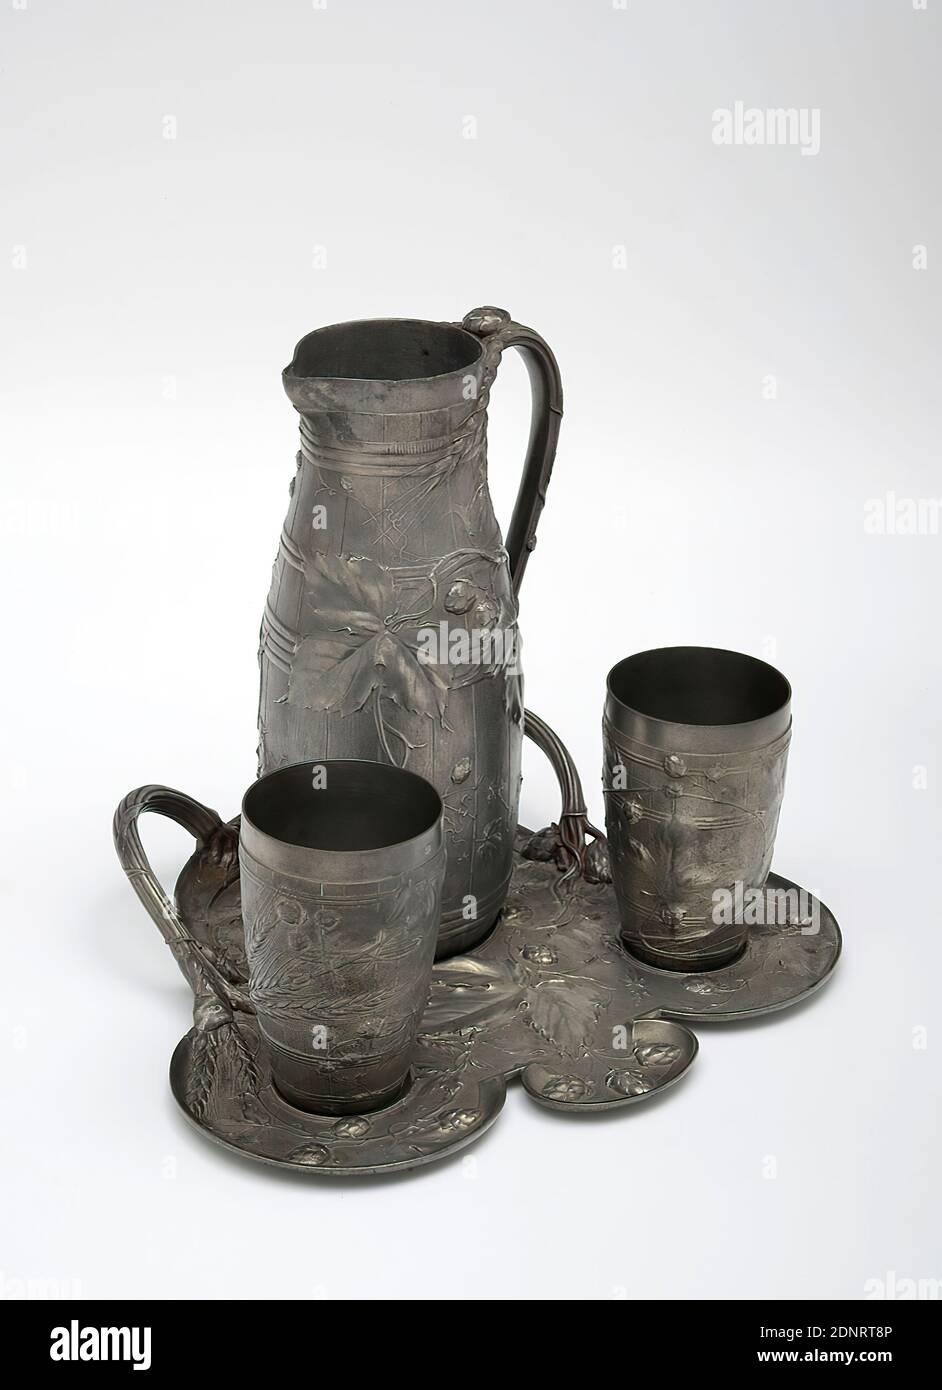 Jules Brateau, beer service with hops and barley decoration, Acquired by the artist at the world exhibition in Paris in 1900, pewter, poured, polished, Object (jug): Height: 24.4 cm; Diameter: 10.4 cm, Stamp: on the tray in the base for the jug and on the underside of the jug and mugs JULES BRATEAU, Stamp: on the bottom of the tray and the jug as well as on the inside bottoms of the cups: gallows and hanged persons, drinking and barware, plants, vegetation, cereal, grain, art nouveau Stock Photo